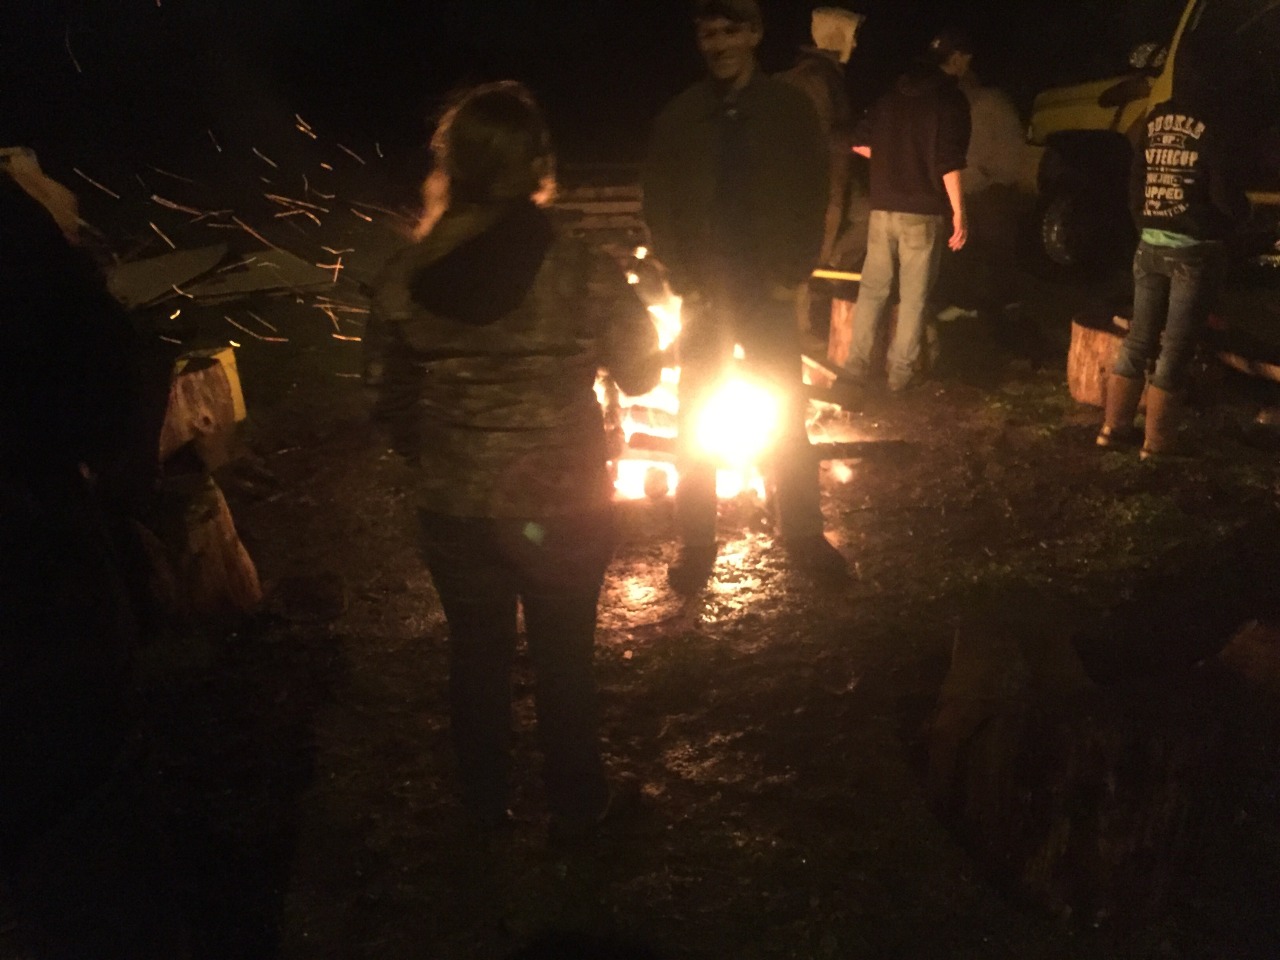 Bonfire in the rain tonight, that&rsquo;s how we roll in the pnw haha who cares